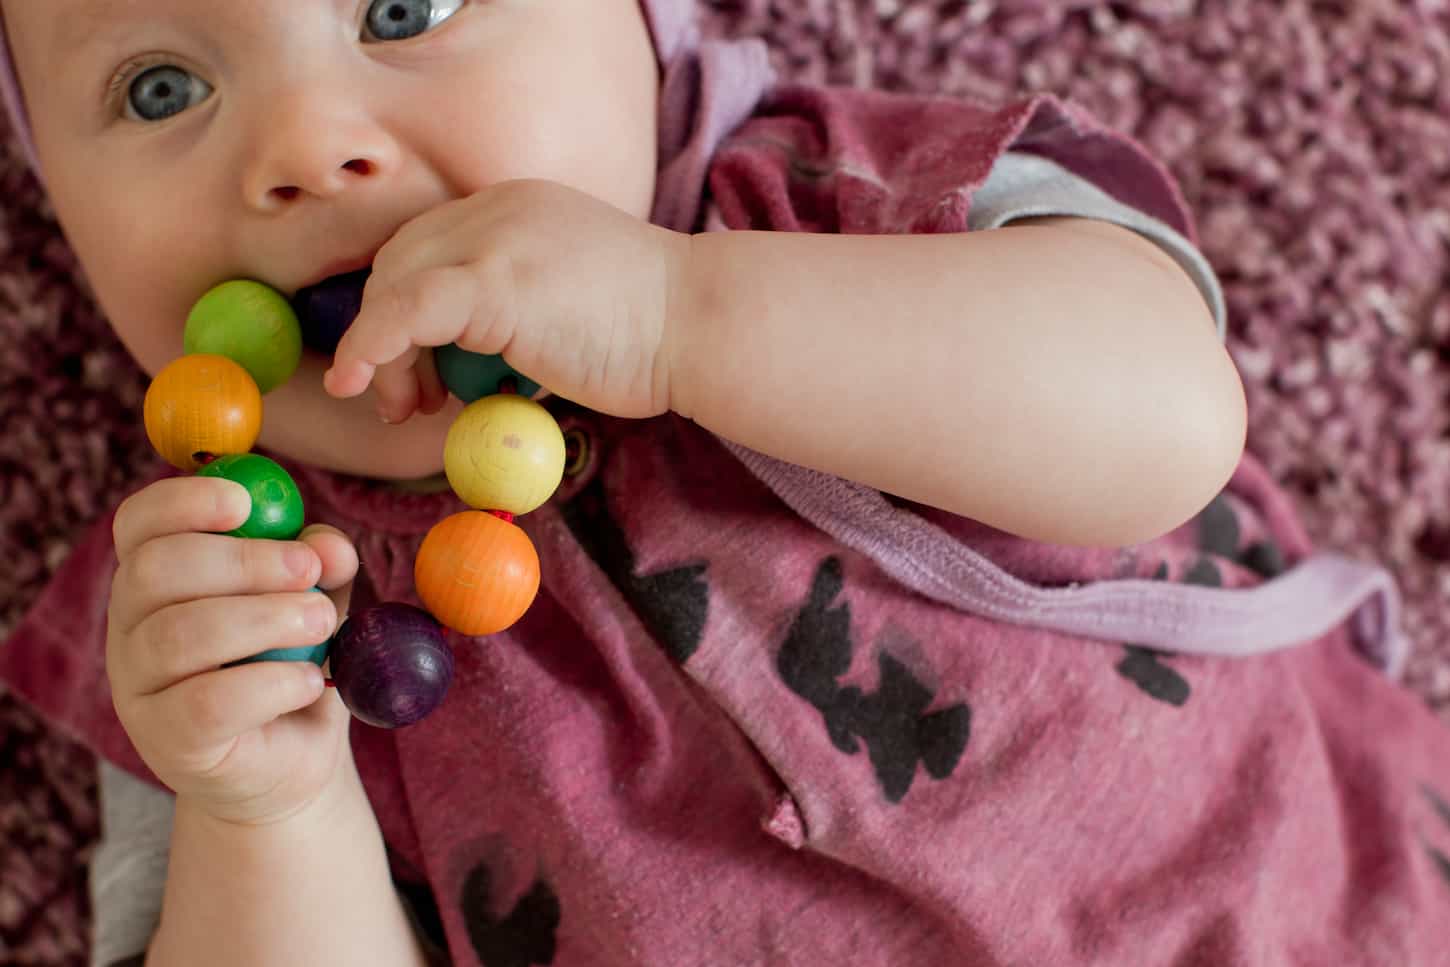 An image of a Baby girl with teething toy in her mouth.